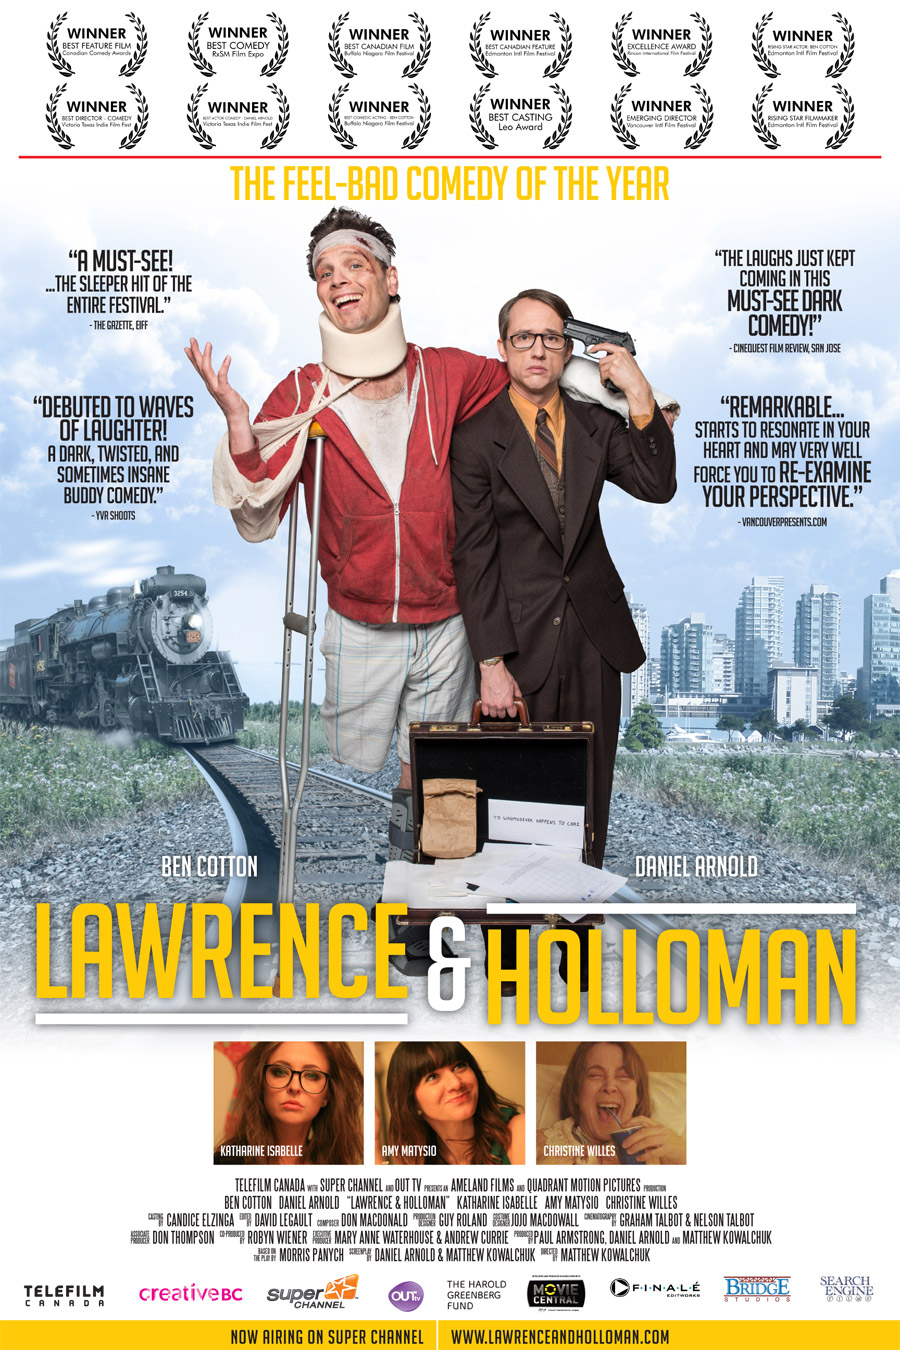 Theatrical poster design for Lawrence & Holloman.